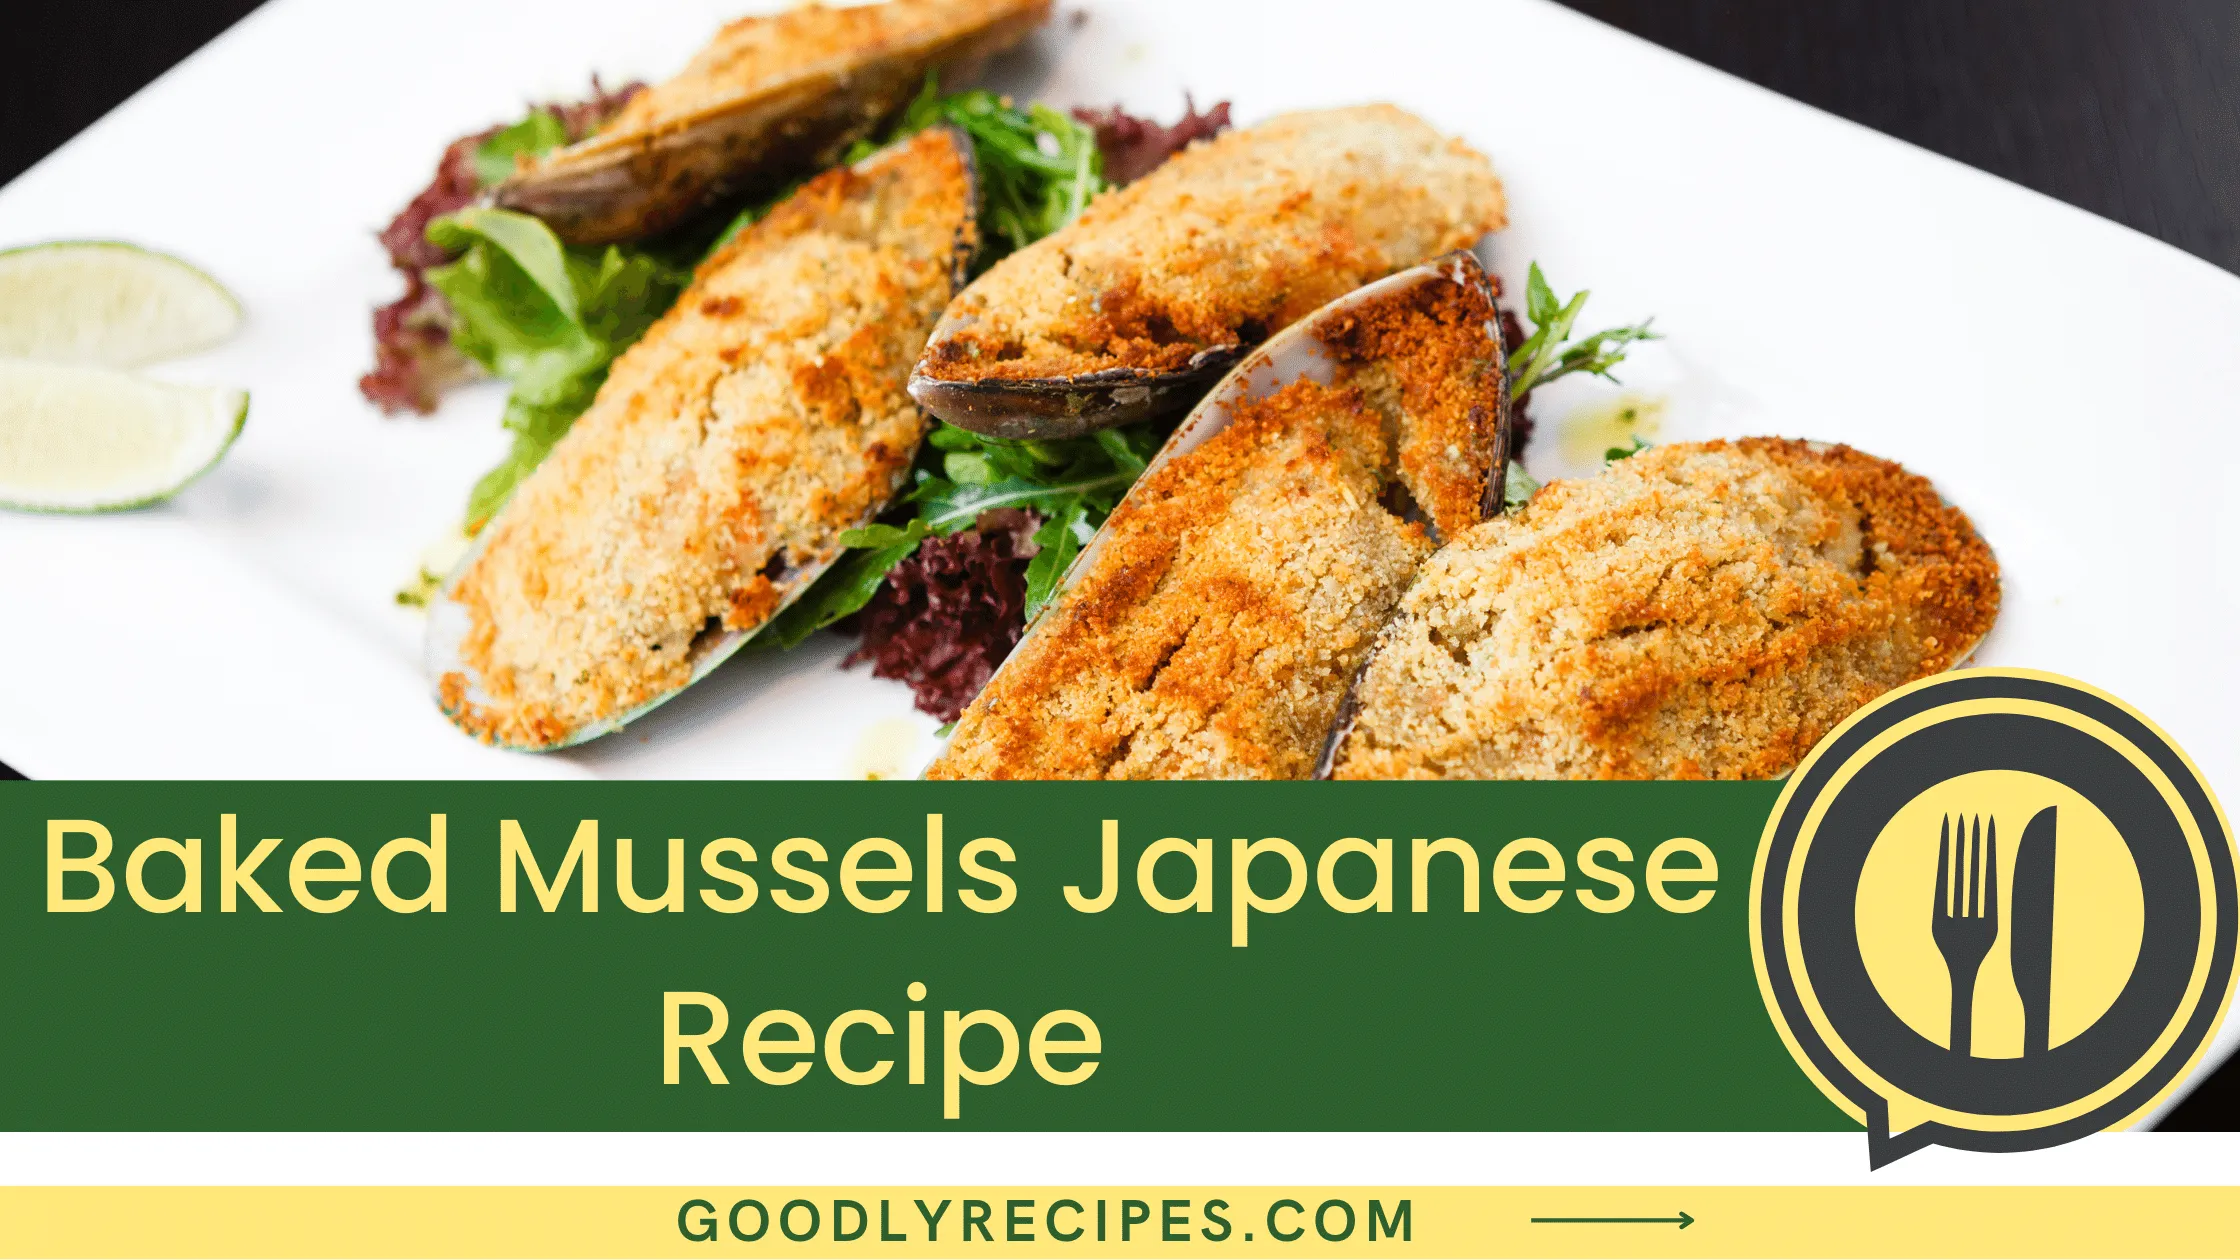 Baked Mussels Japanese Recipe - For Food Lovers